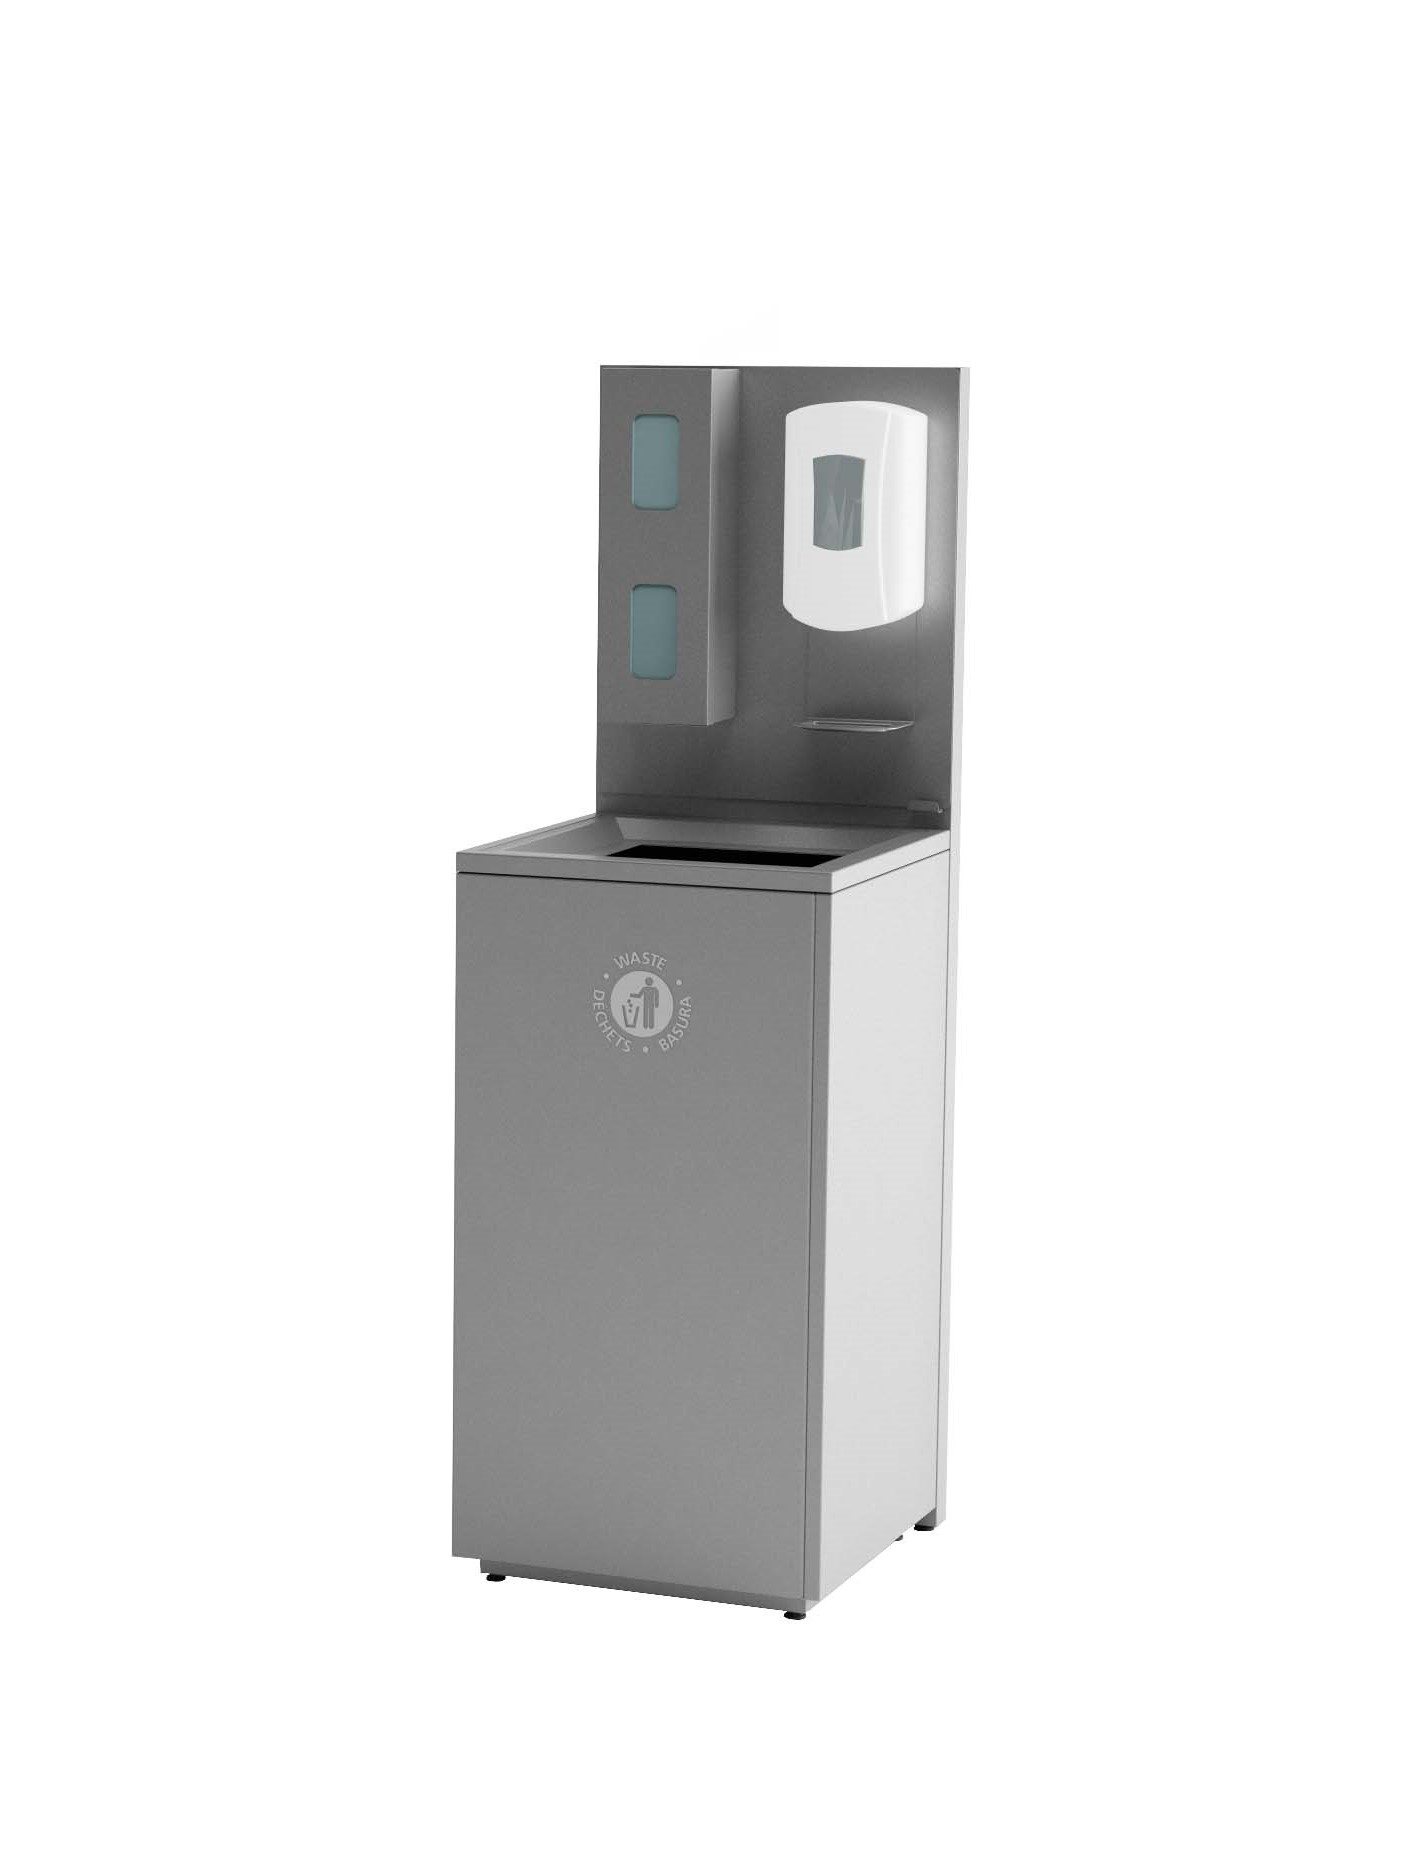 Solna with Receptacle Sanitization & PPE Station